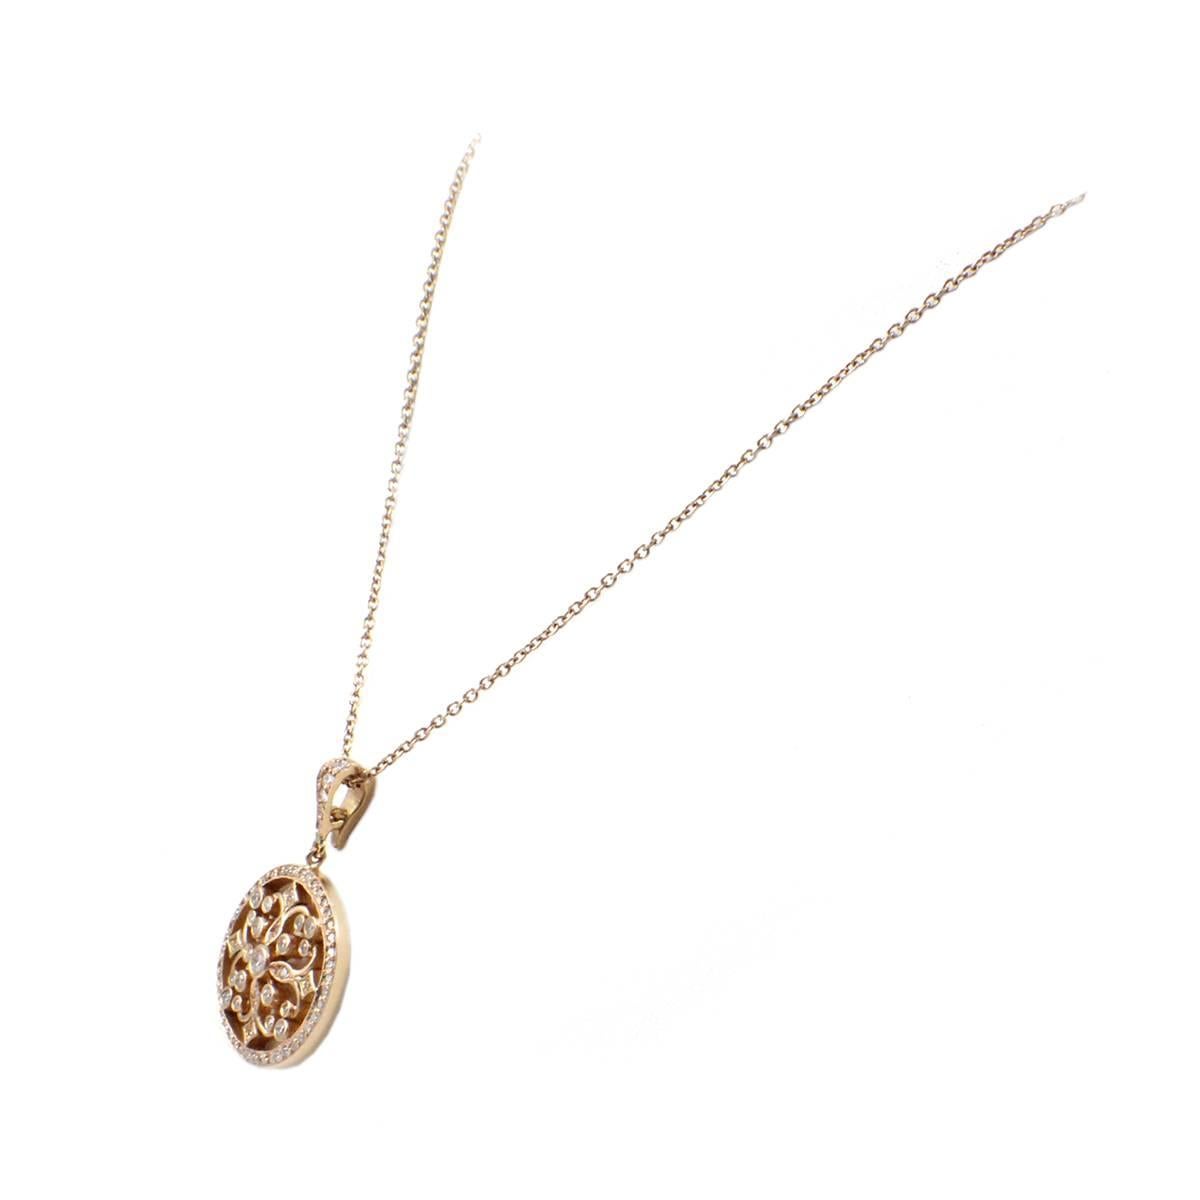 This beautiful necklace is made in 18k rose gold with diamonds by designer Penny Preville. The pendant features round brilliant diamonds for a total weight of 0.66 carat. The stones are graded G in color and VS in clarity. The pendant measures 23mm